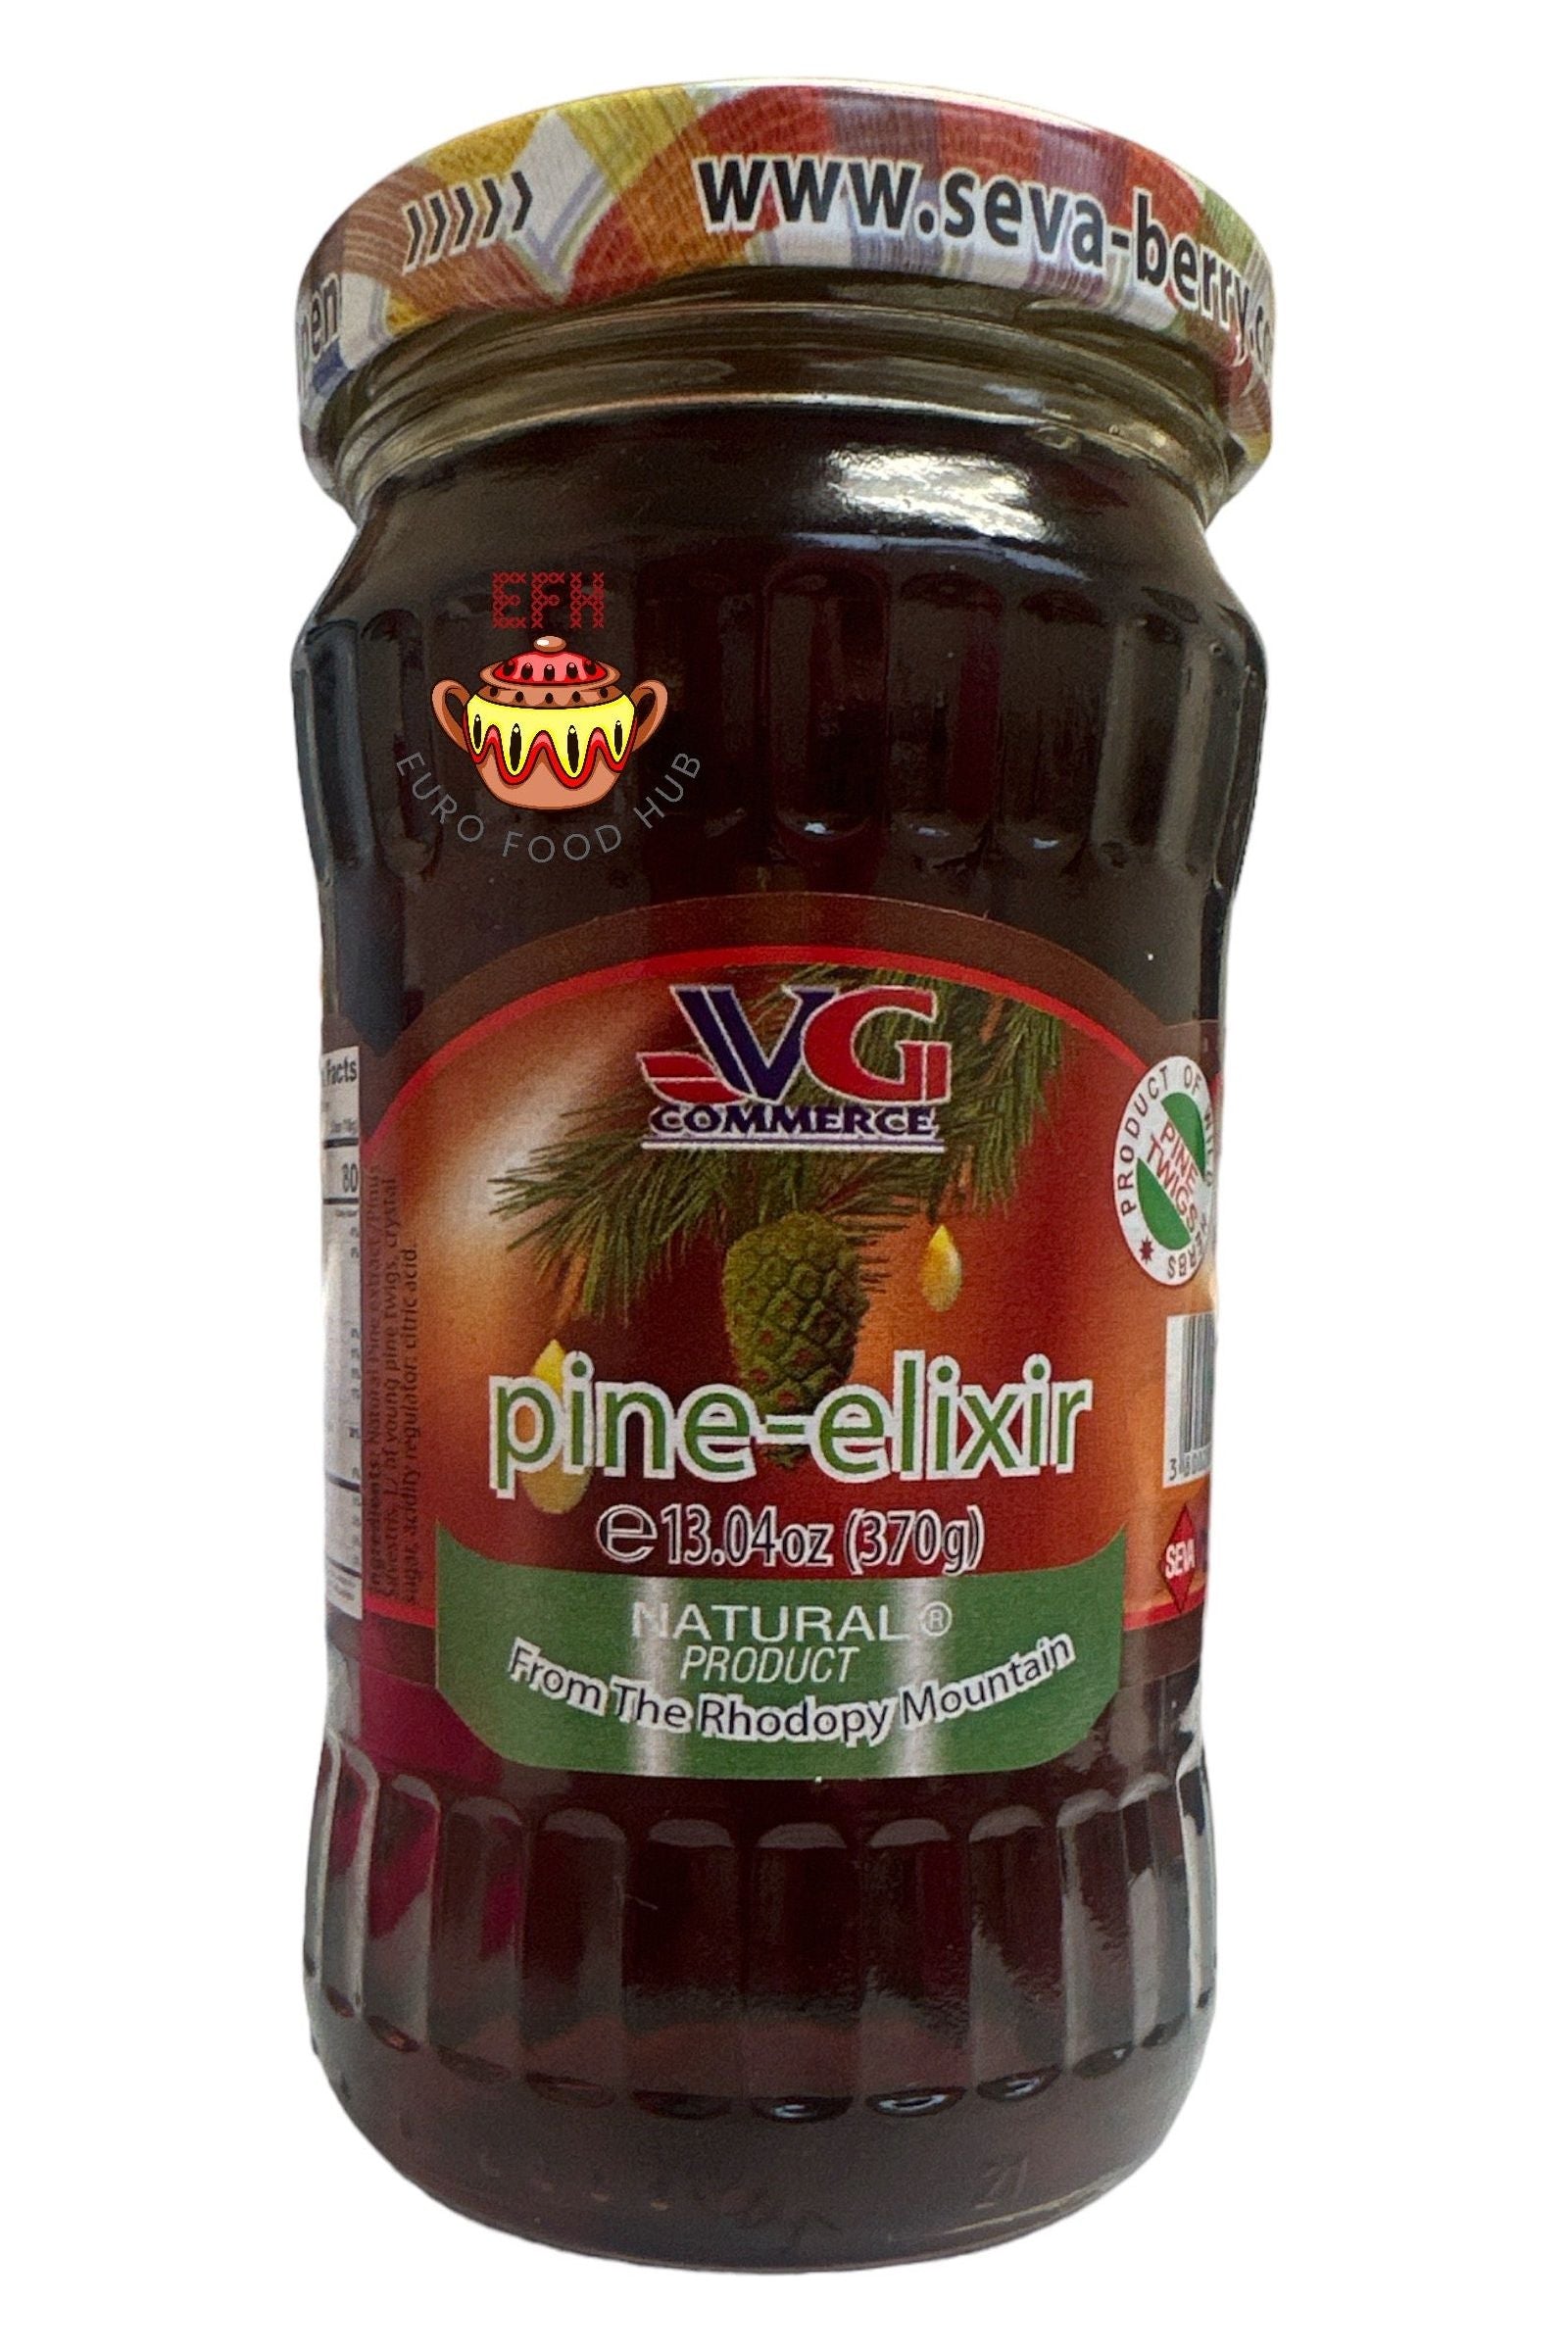 New! PINE ELIXIR from the Rhodopy Mountain - 370g